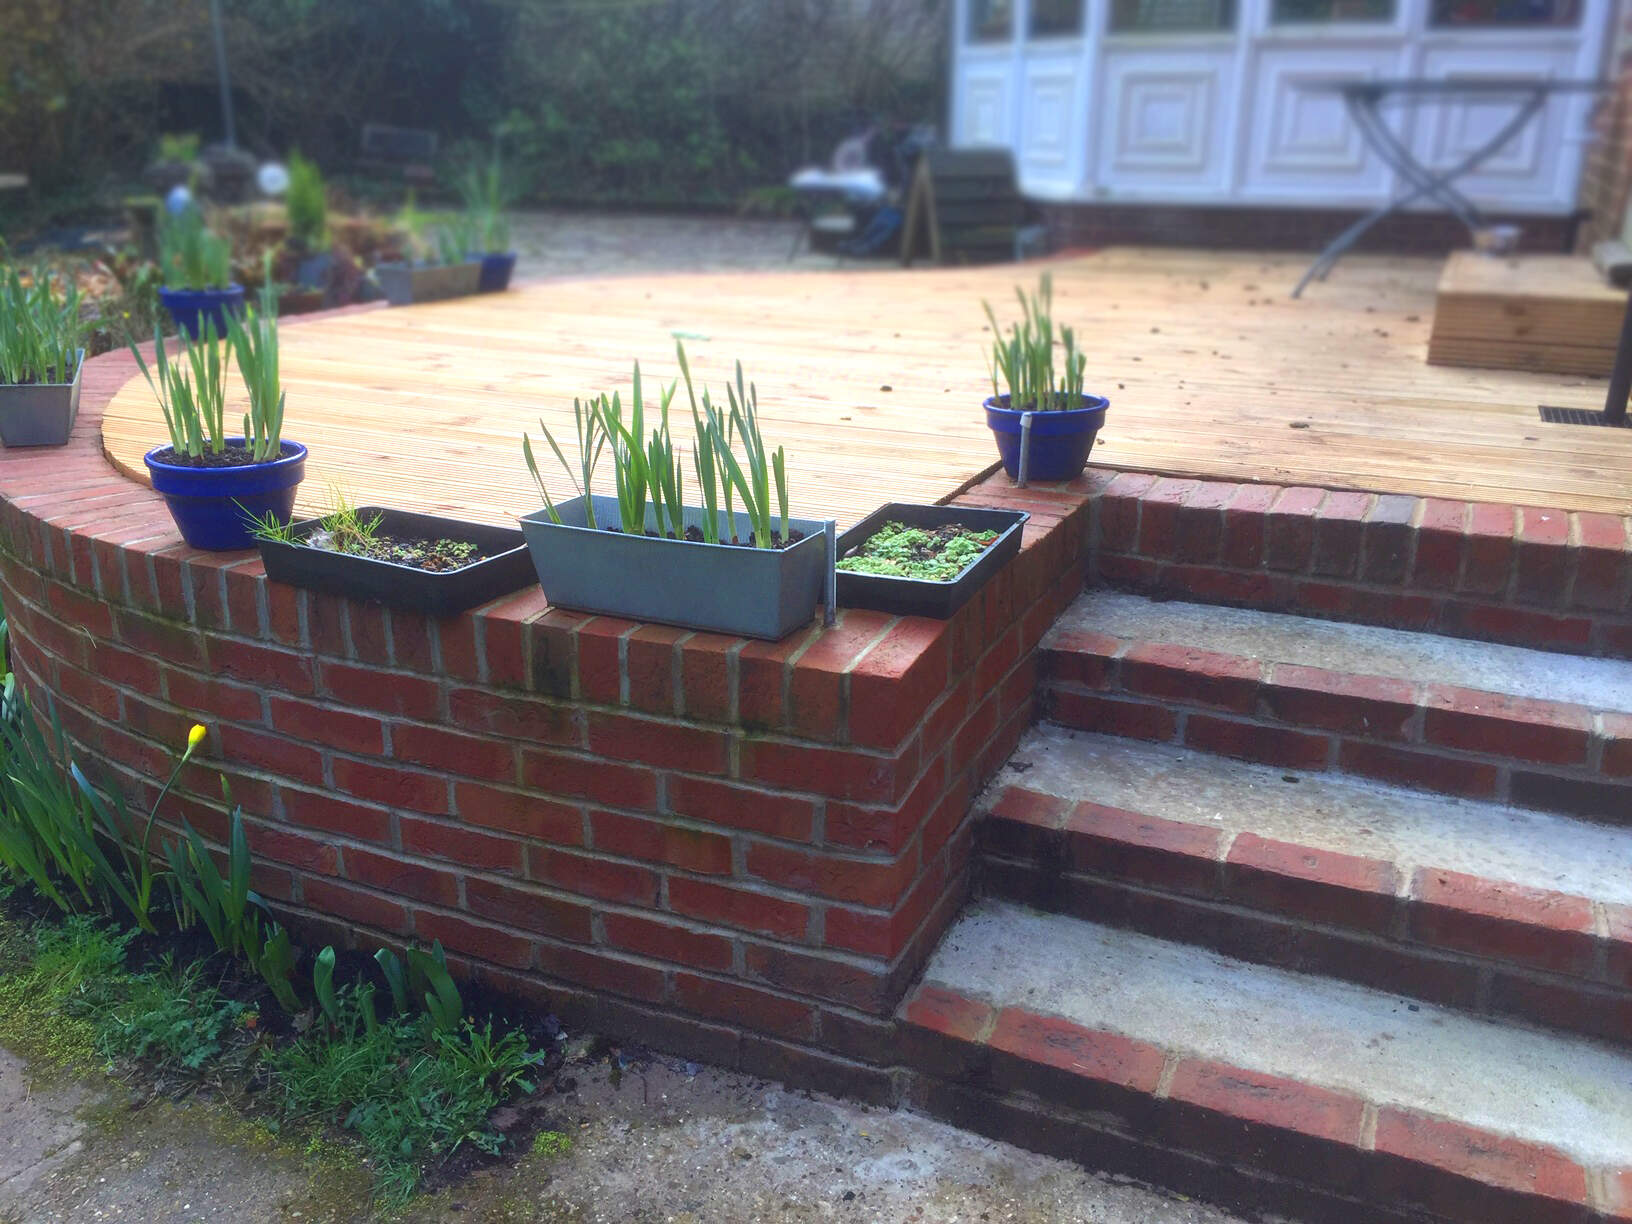 Creation of a decking area with brick perimeter and steps